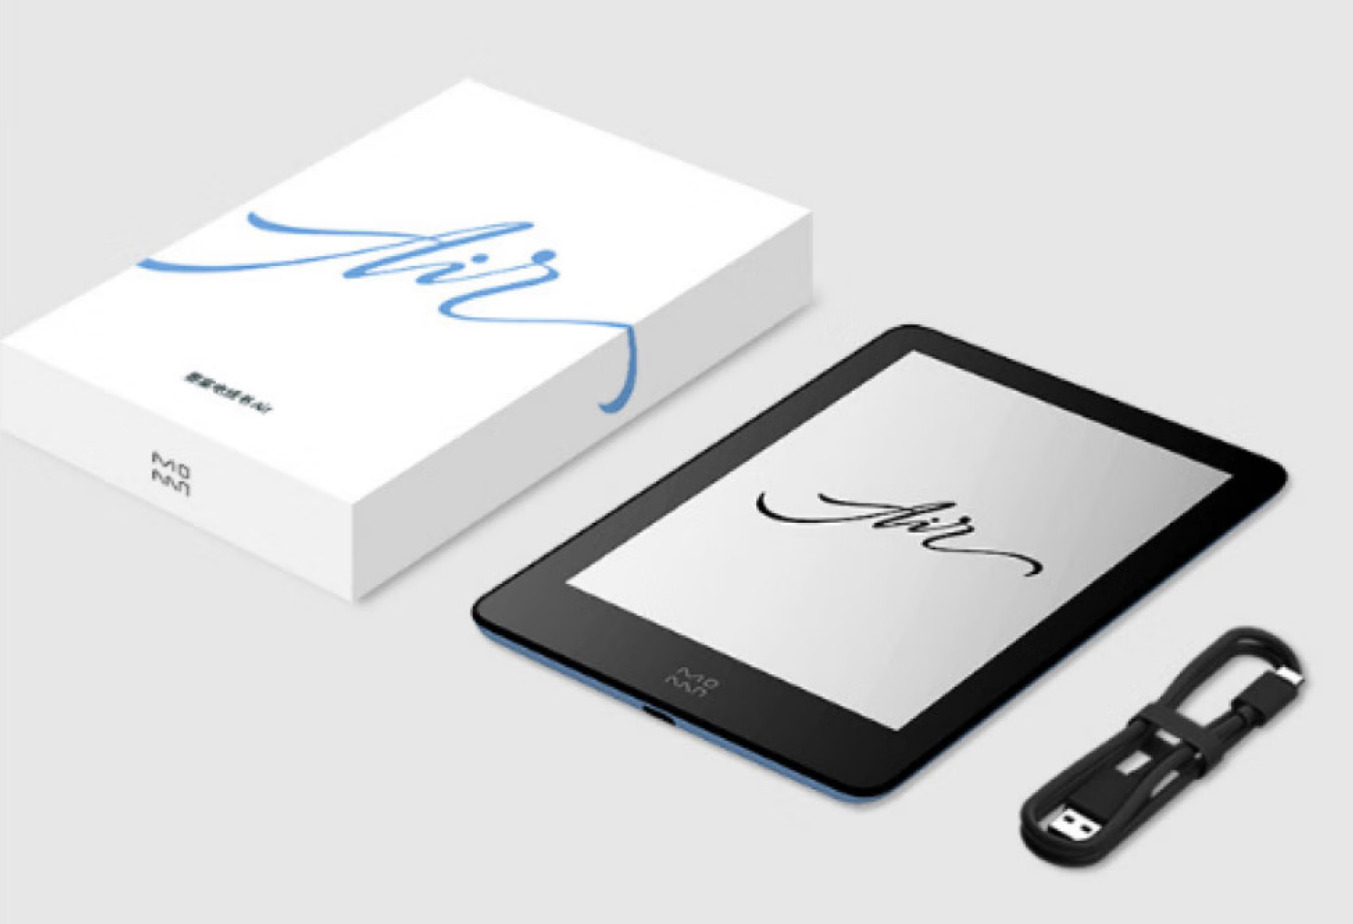 XIAOMI MOAAN Air e-reader with 6-inch 300 PPI E Ink Carta 1200 display  launched - Good e-Reader